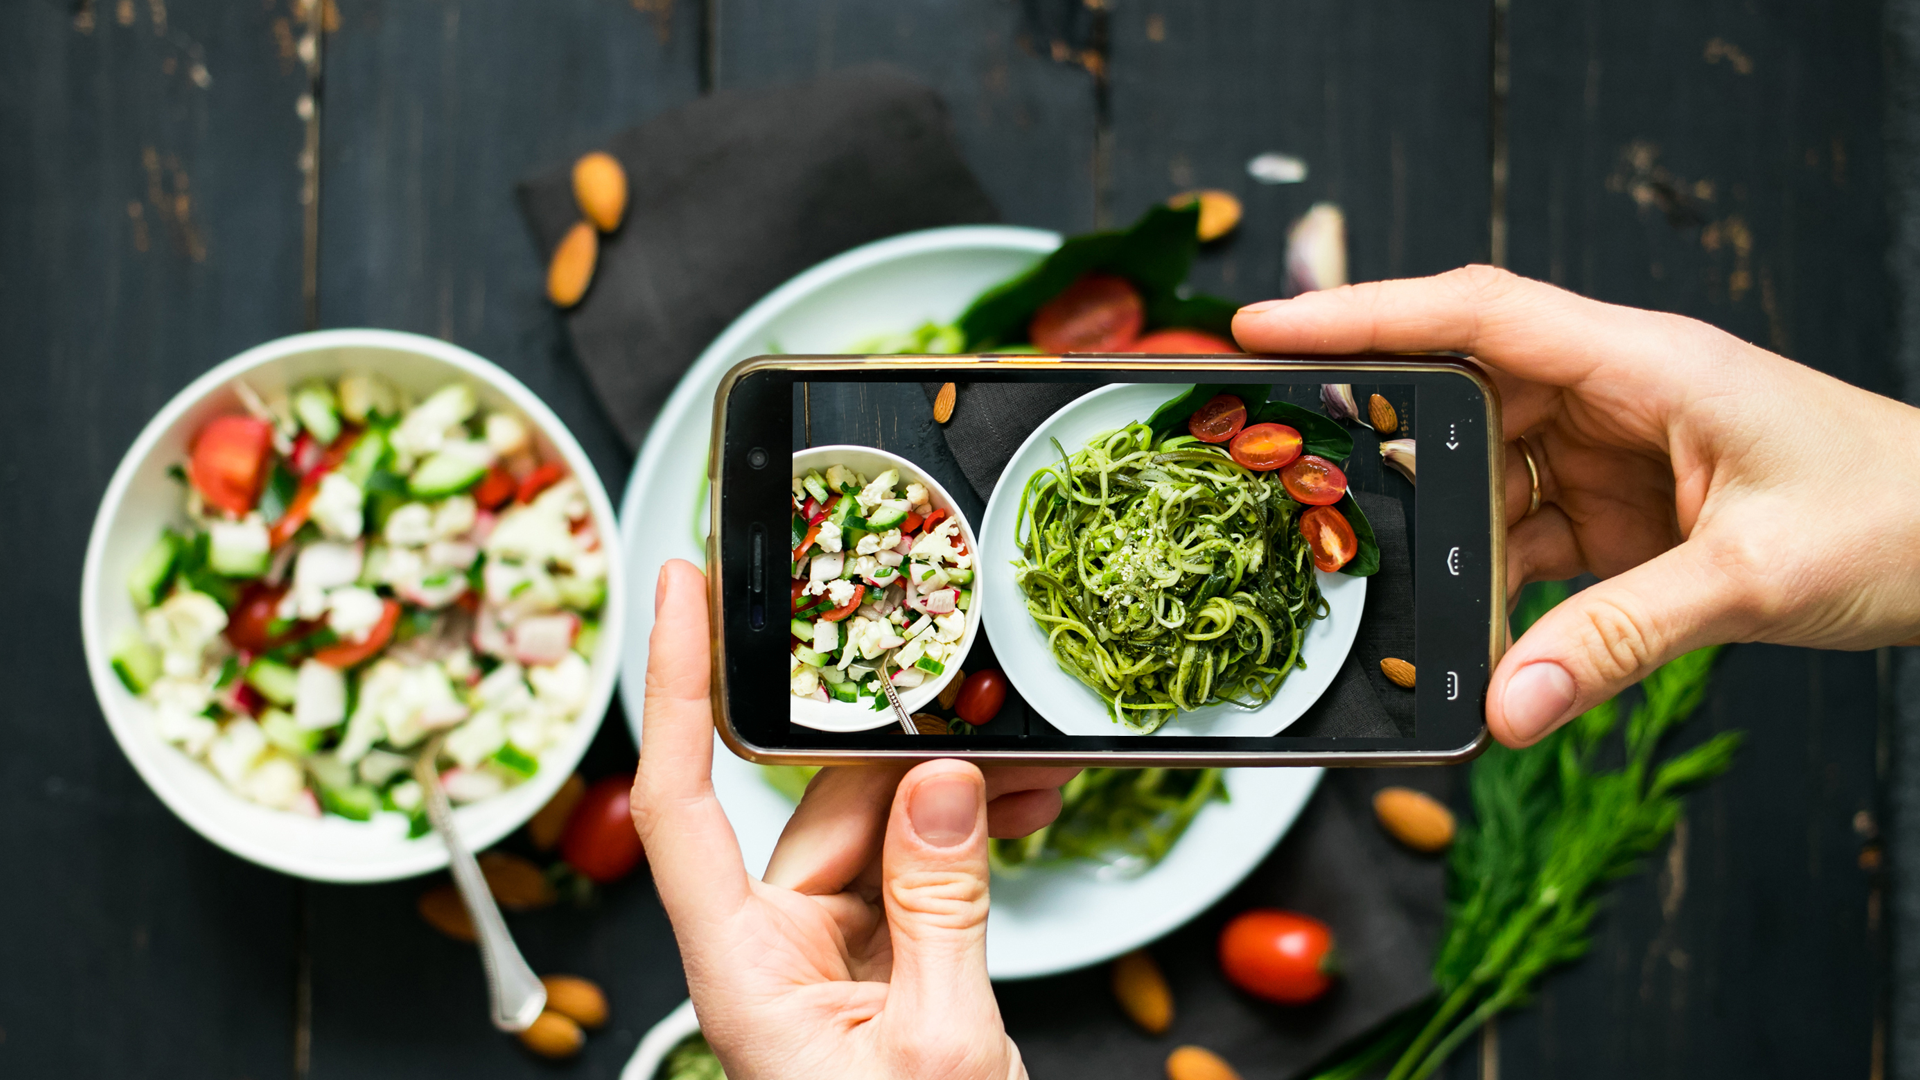 UK influencer taking picture of food with smartphone